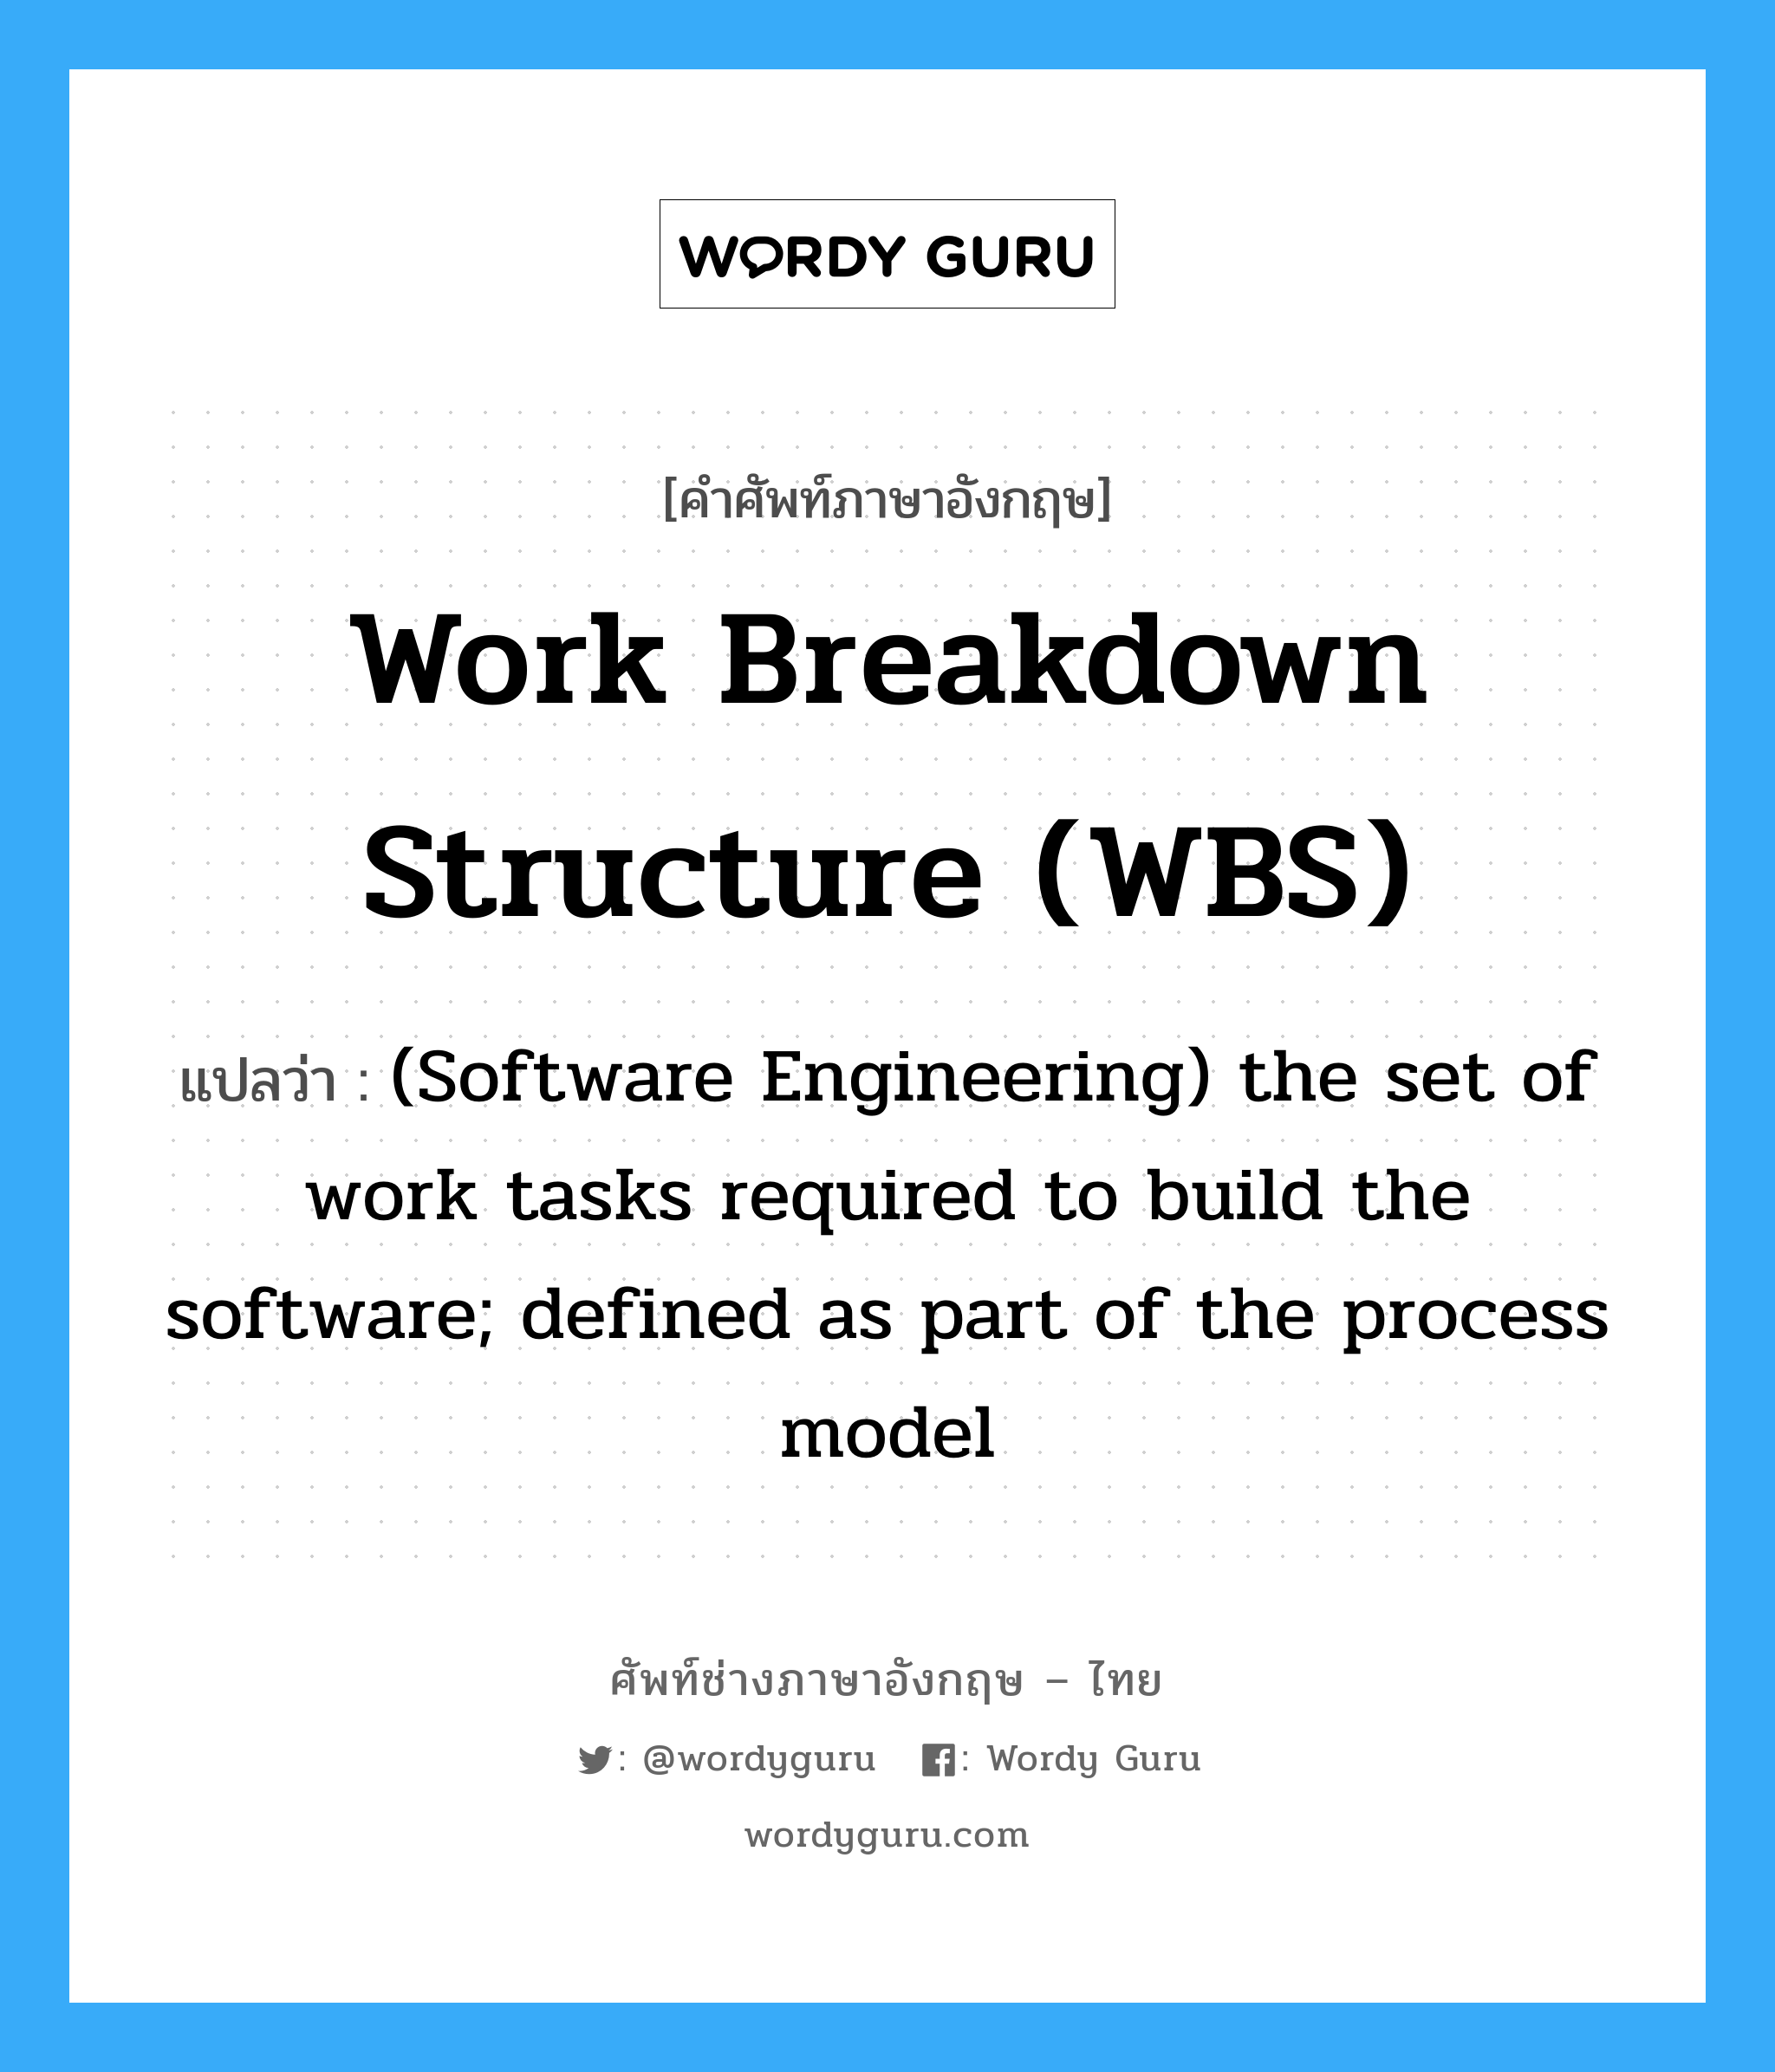 (Software Engineering) the set of work tasks required to build the software; defined as part of the process model ภาษาอังกฤษ?, คำศัพท์ช่างภาษาอังกฤษ - ไทย (Software Engineering) the set of work tasks required to build the software; defined as part of the process model คำศัพท์ภาษาอังกฤษ (Software Engineering) the set of work tasks required to build the software; defined as part of the process model แปลว่า Work breakdown structure (WBS)